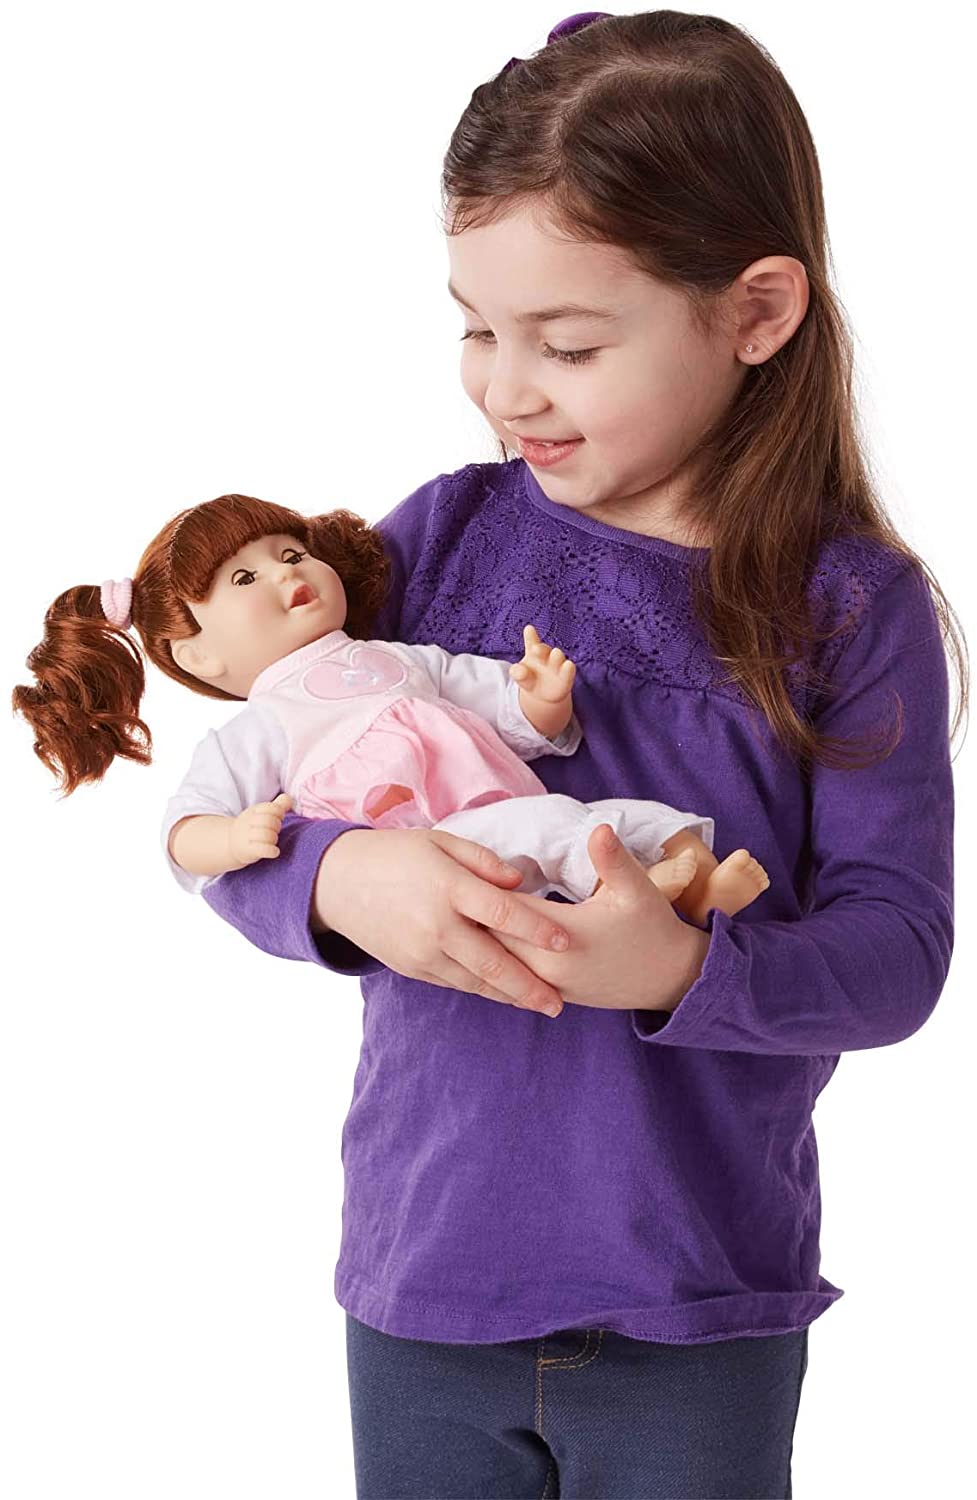 Melissa & Doug| Mine to Love Brianna - 12 inch doll | Big Red Warehouse |  | play role play